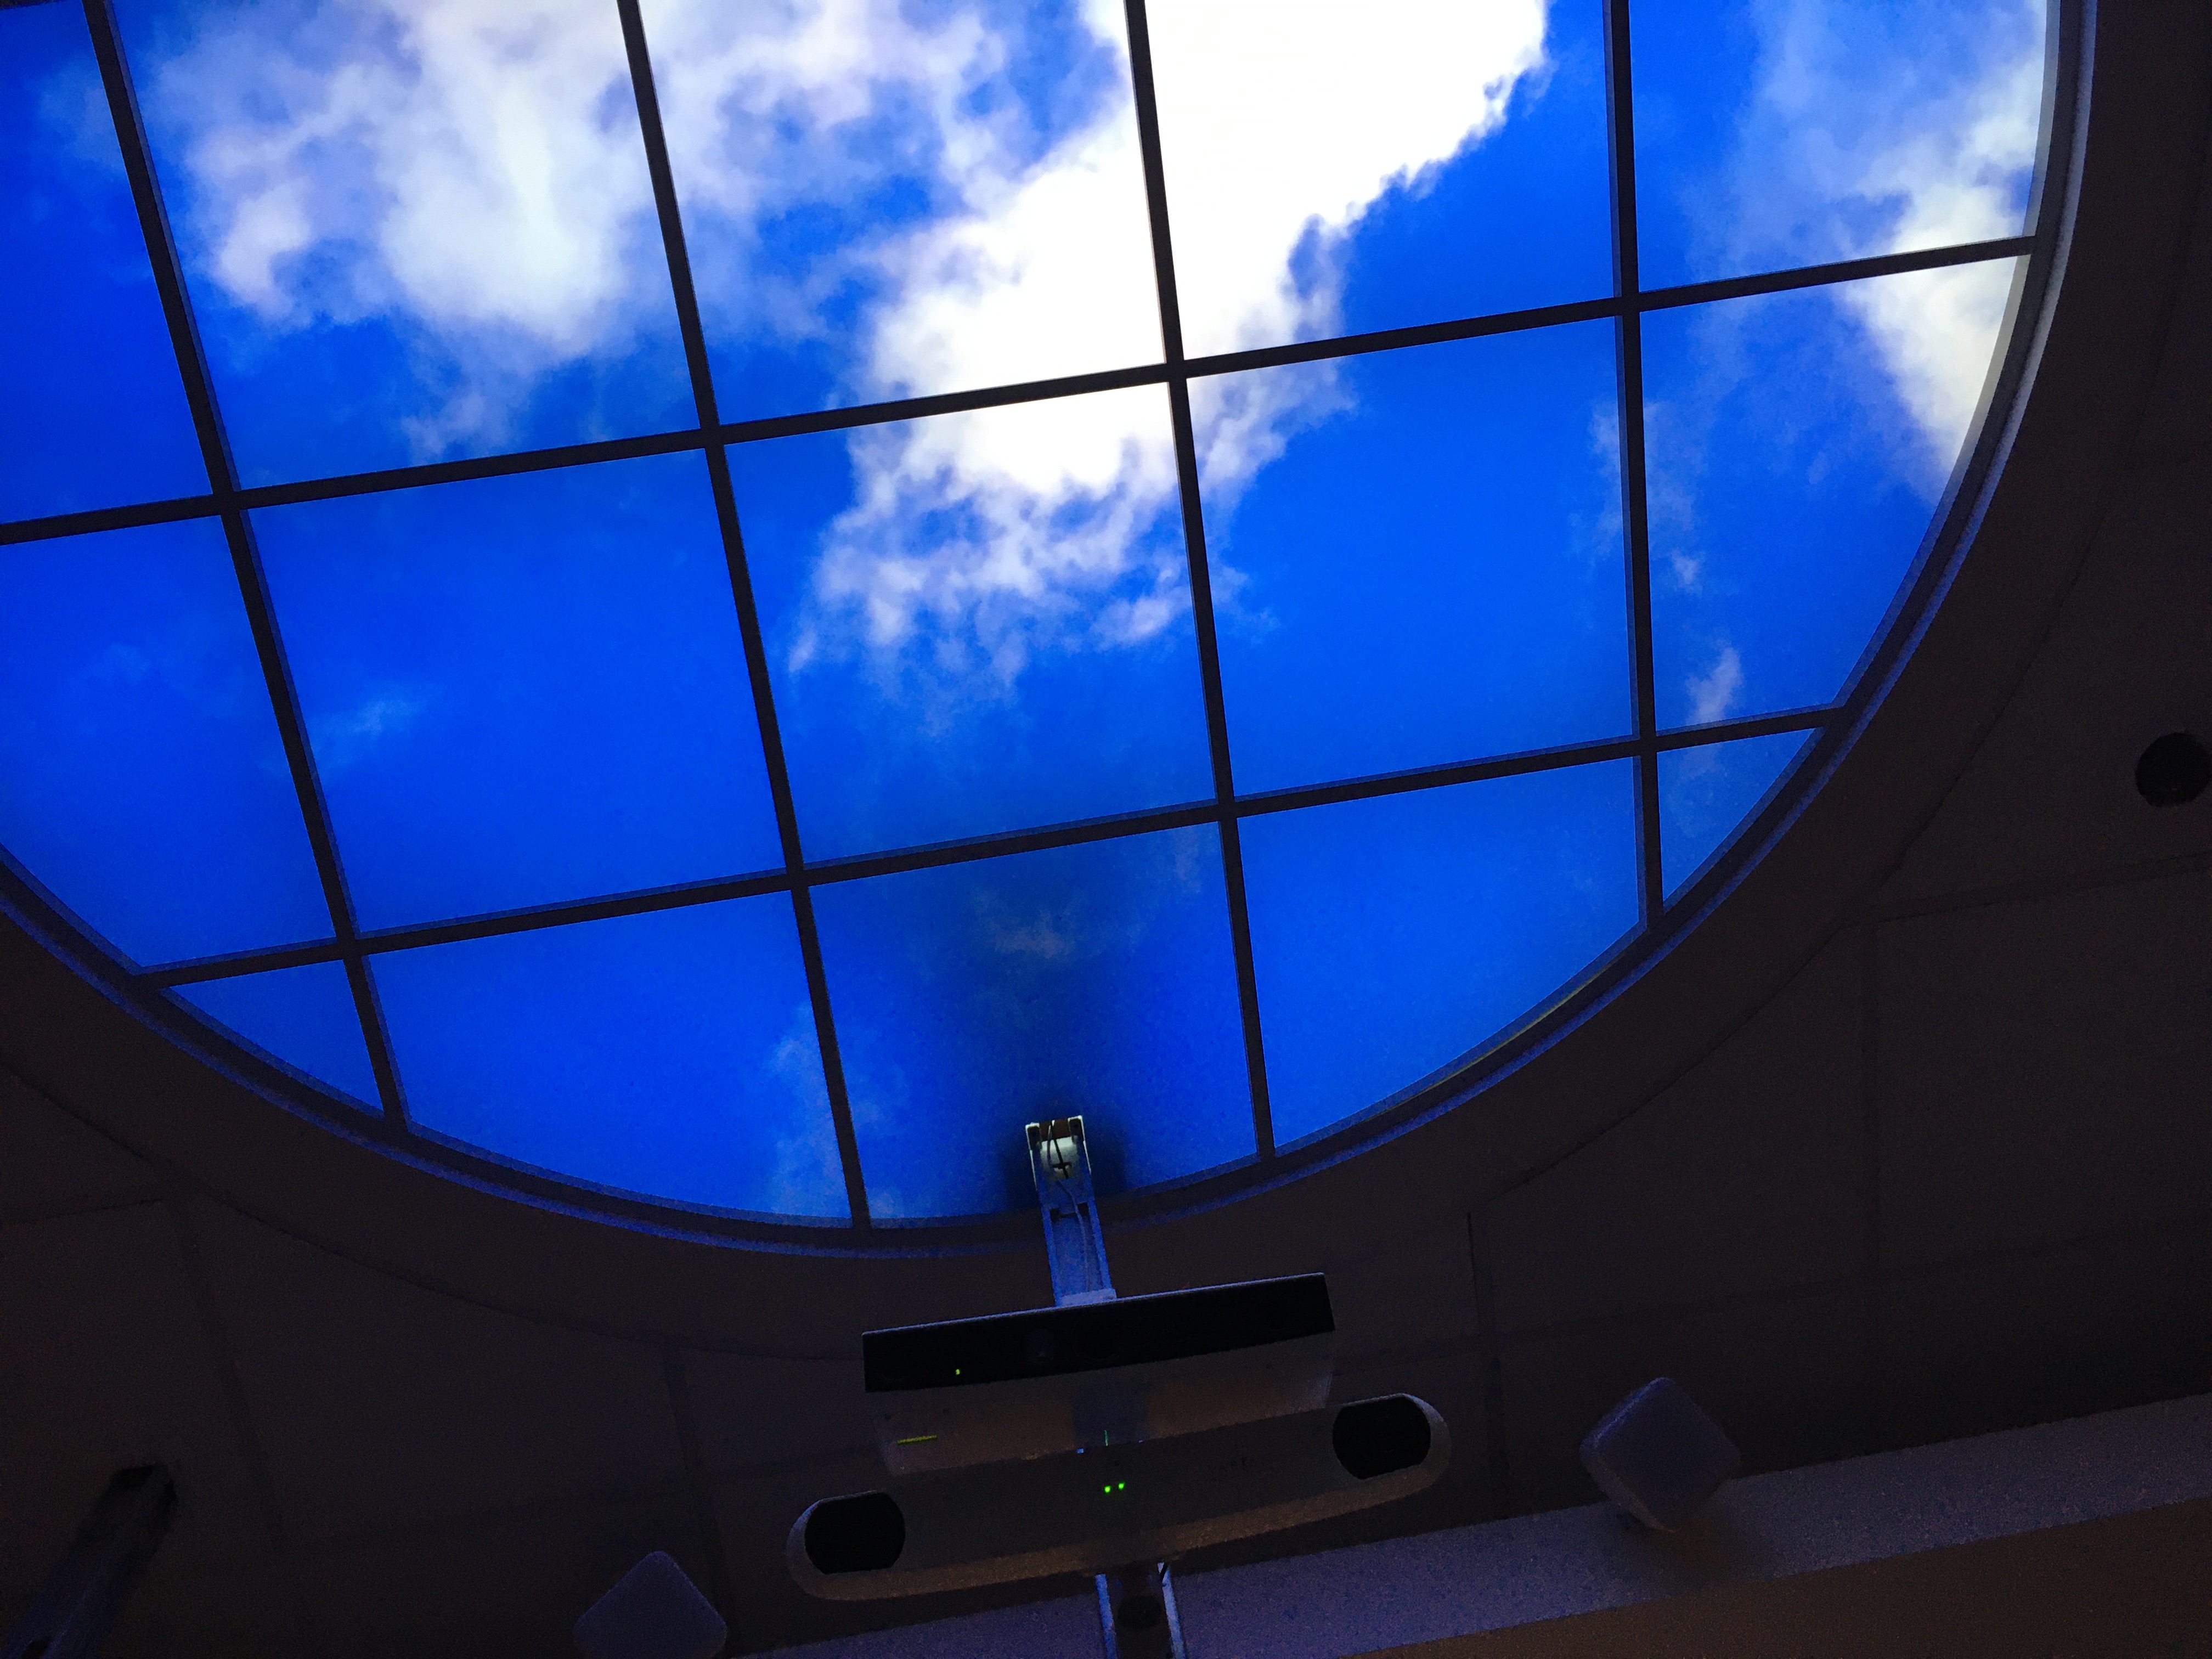 Photo of a ceiling light that looks like a window, with clouds in a blue sky.